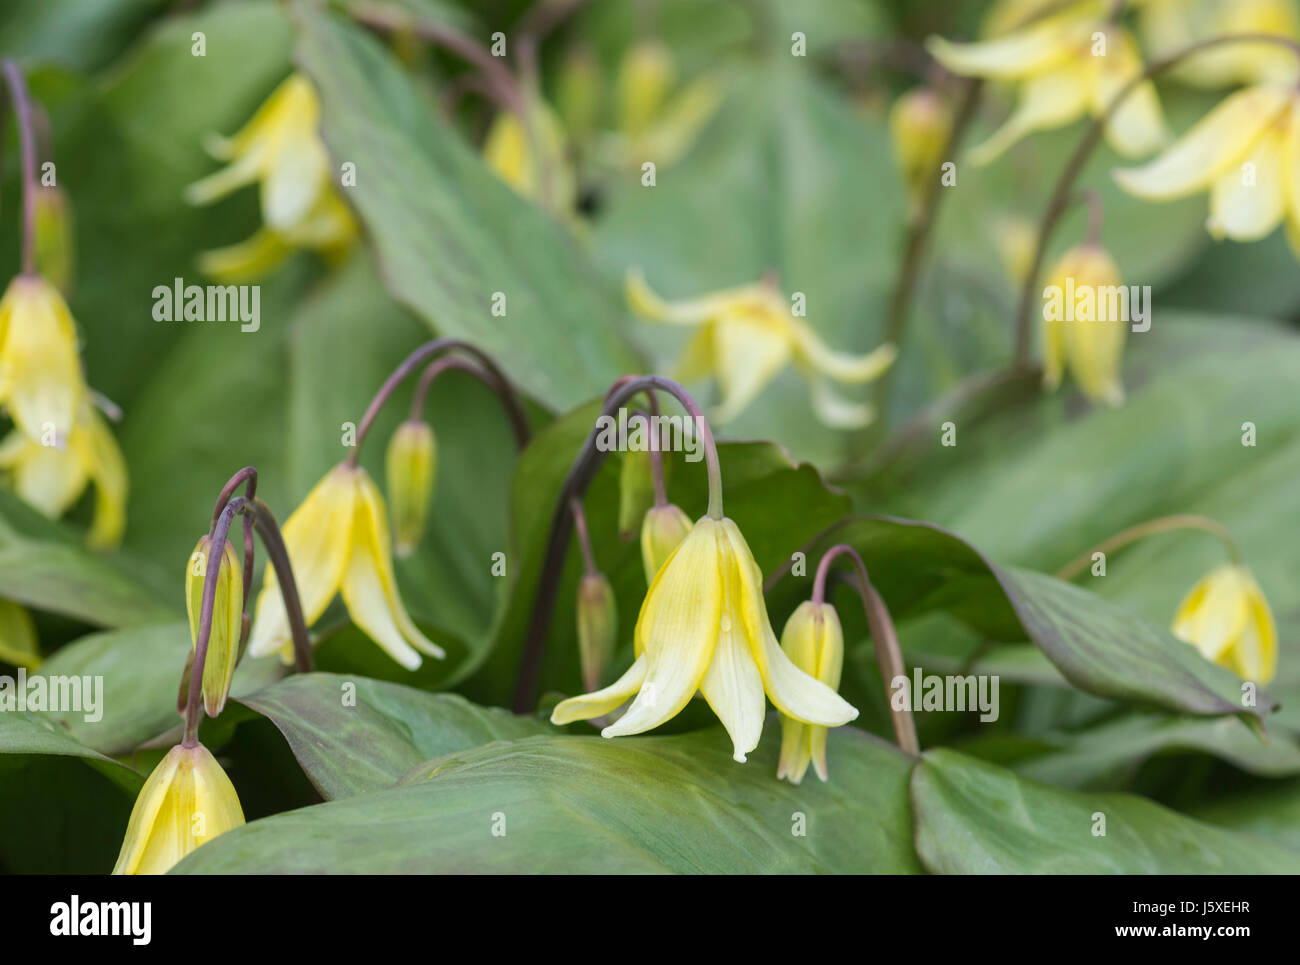 Bellwort, Sessile bellwort, Uvularia sessilifolia, Bell shaped yellow flowers growing outdoor. Stock Photo